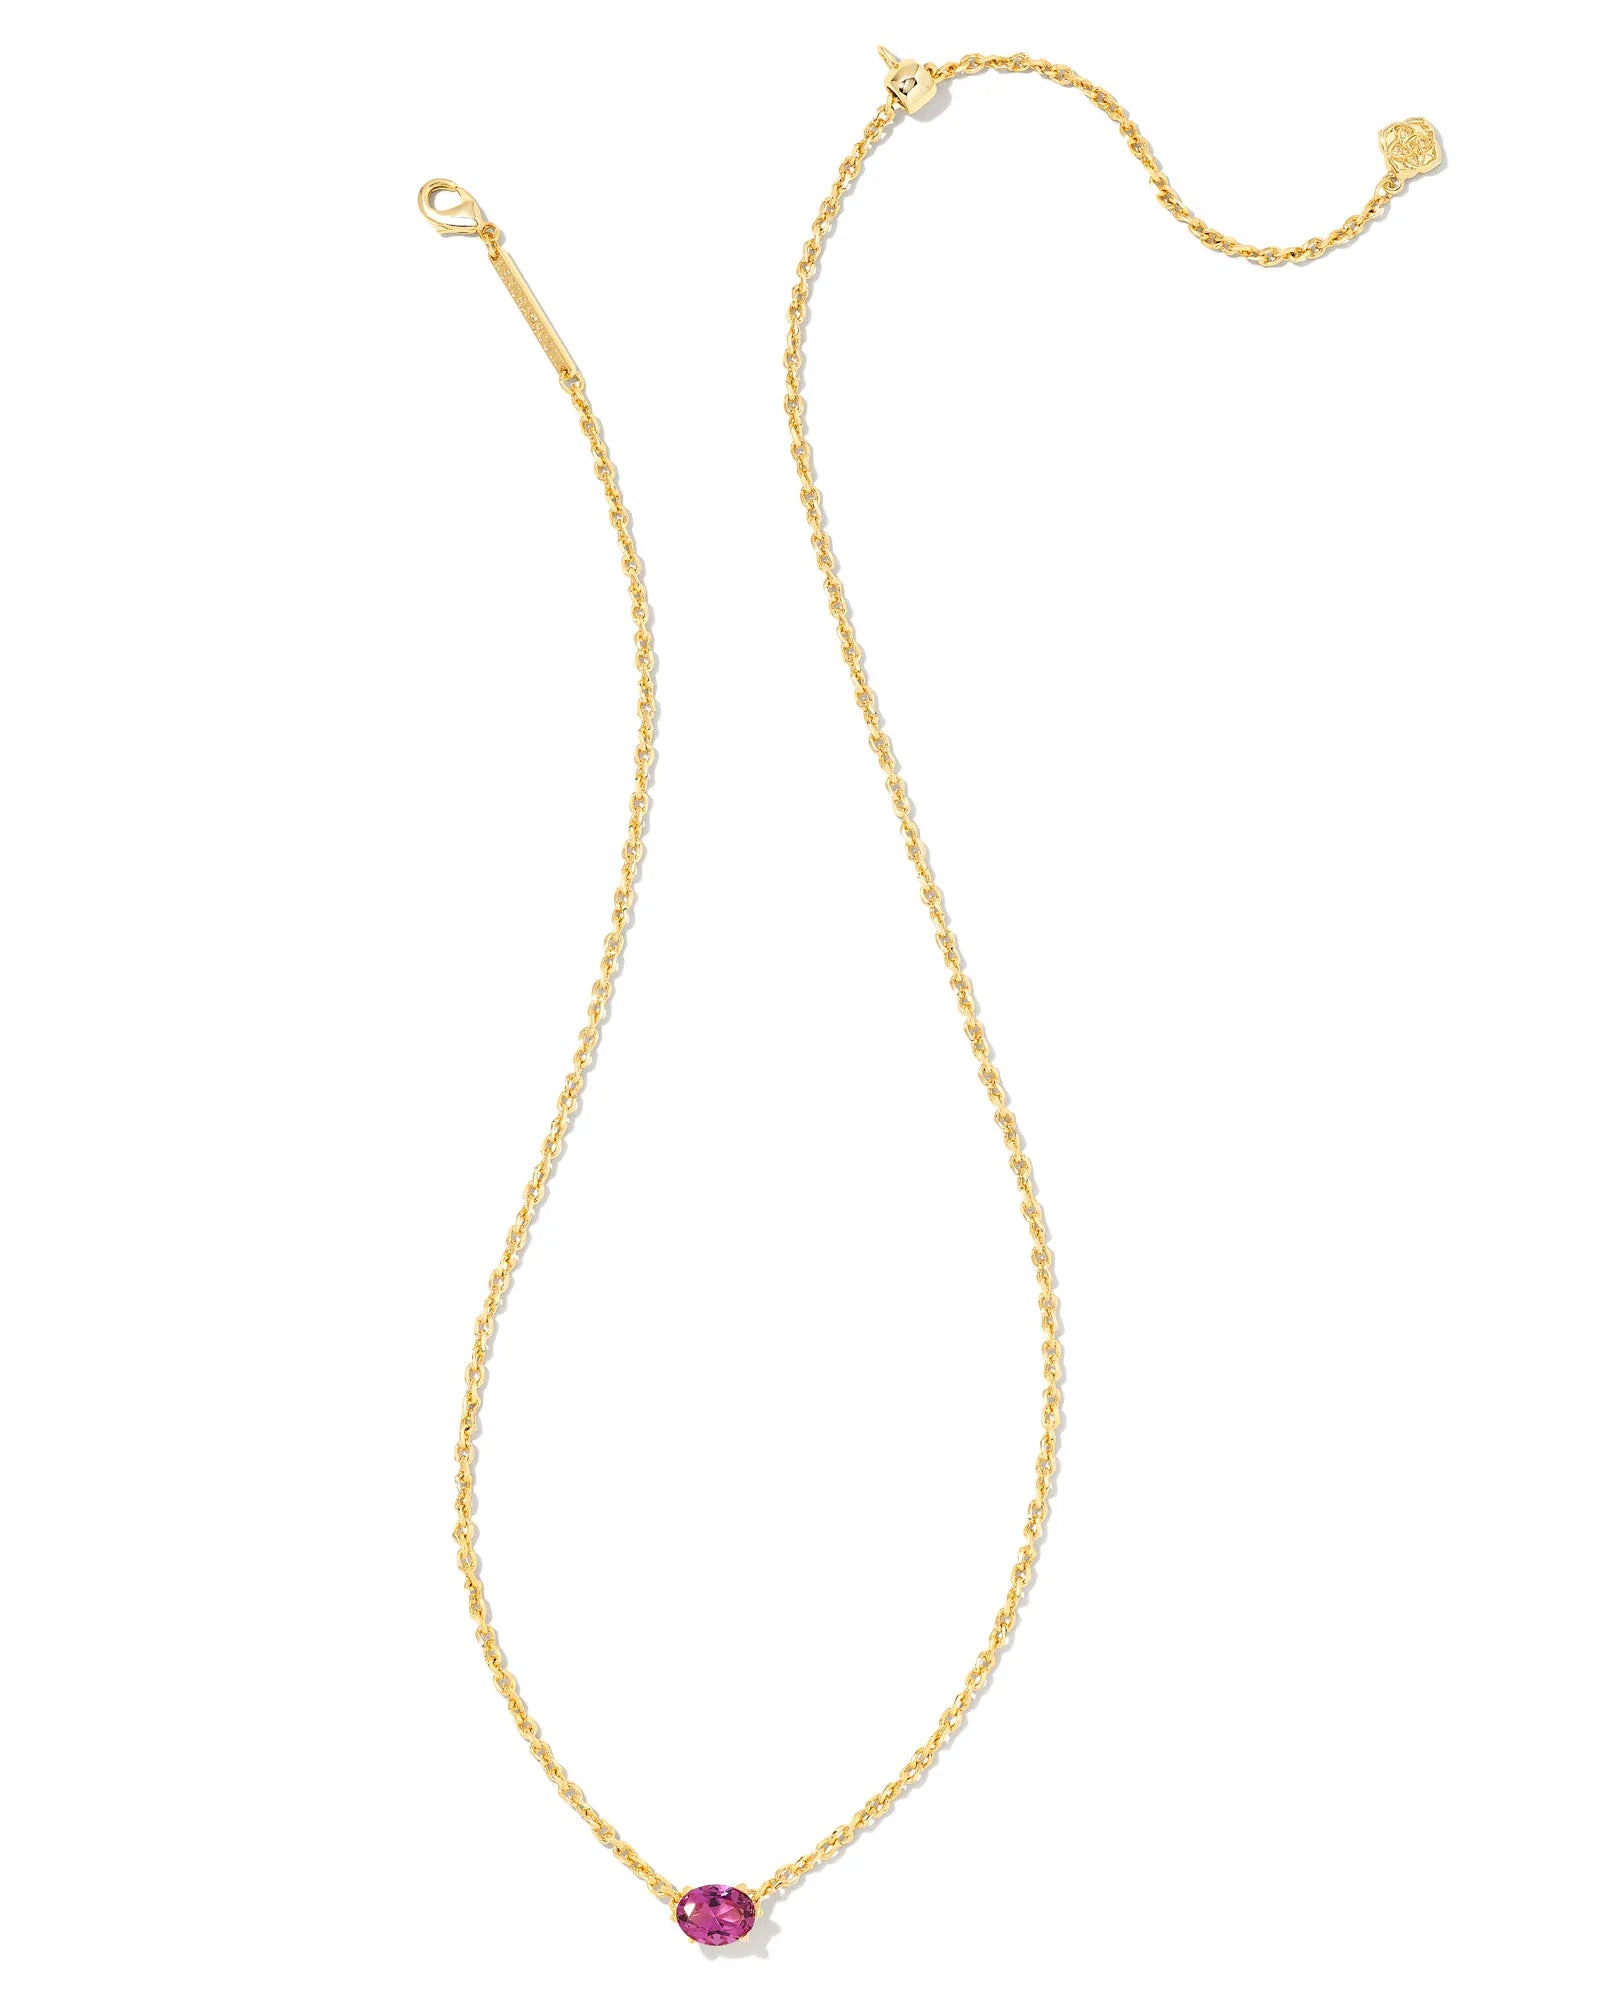 Kendra Scott Cailin Crystal Pendant Necklace Gold Purple Crystal-Necklaces-Kendra Scott-N1941GLD-The Twisted Chandelier